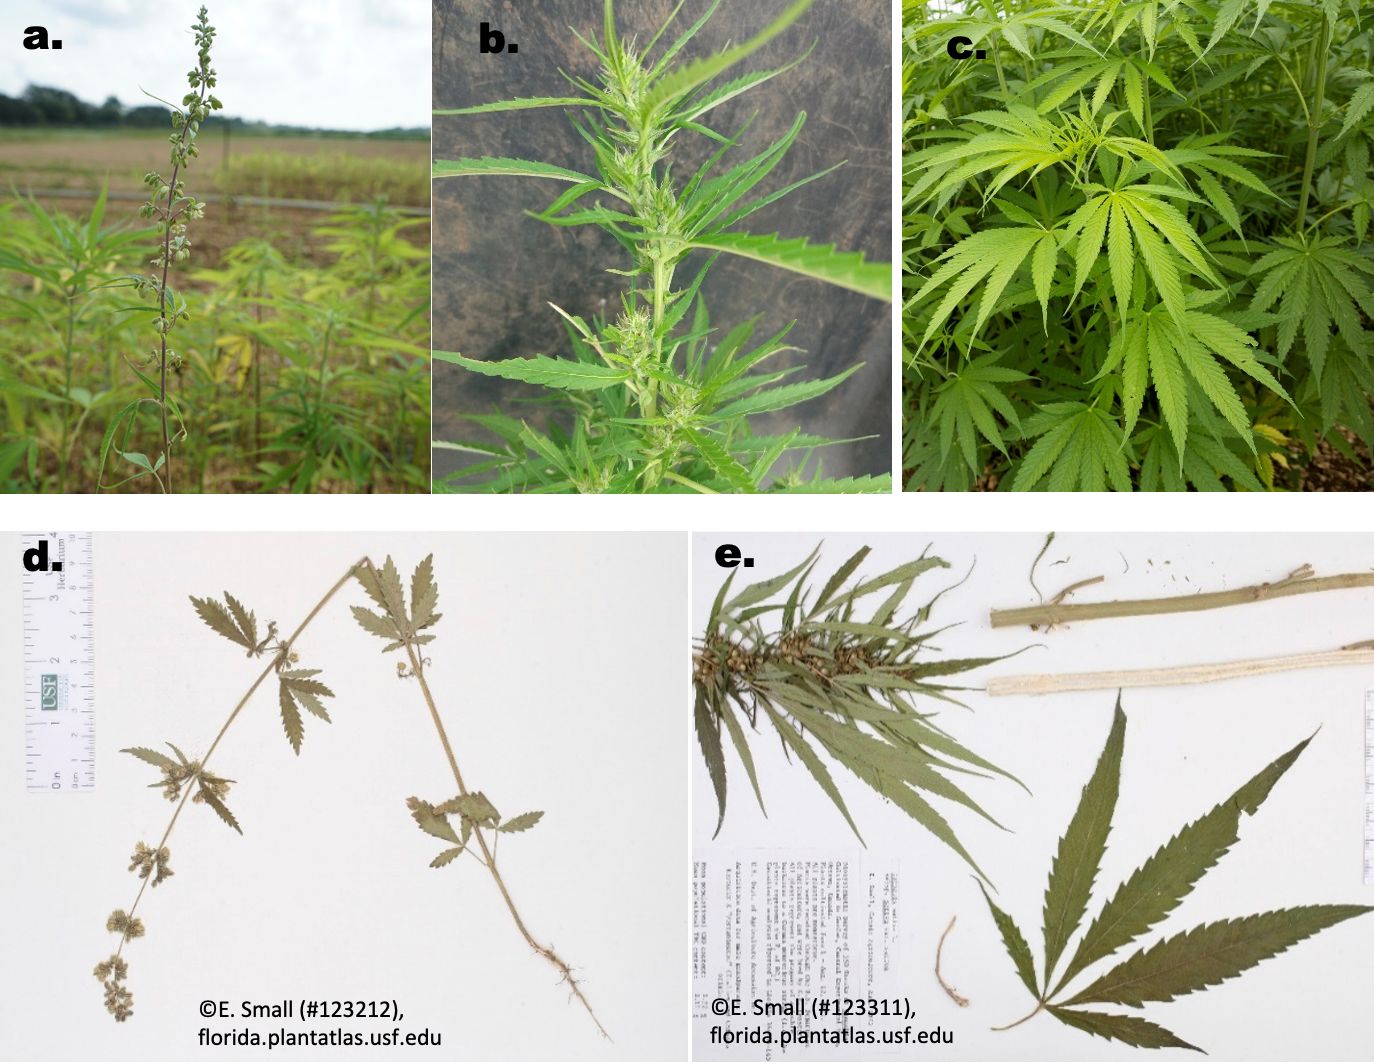 Cannabis sativa L. live plants with: a.) male flowers; b.) female flowers; and c.) many leaflets. Herbarium specimens with d.) male flowers and e.) female flowers and fruit. 